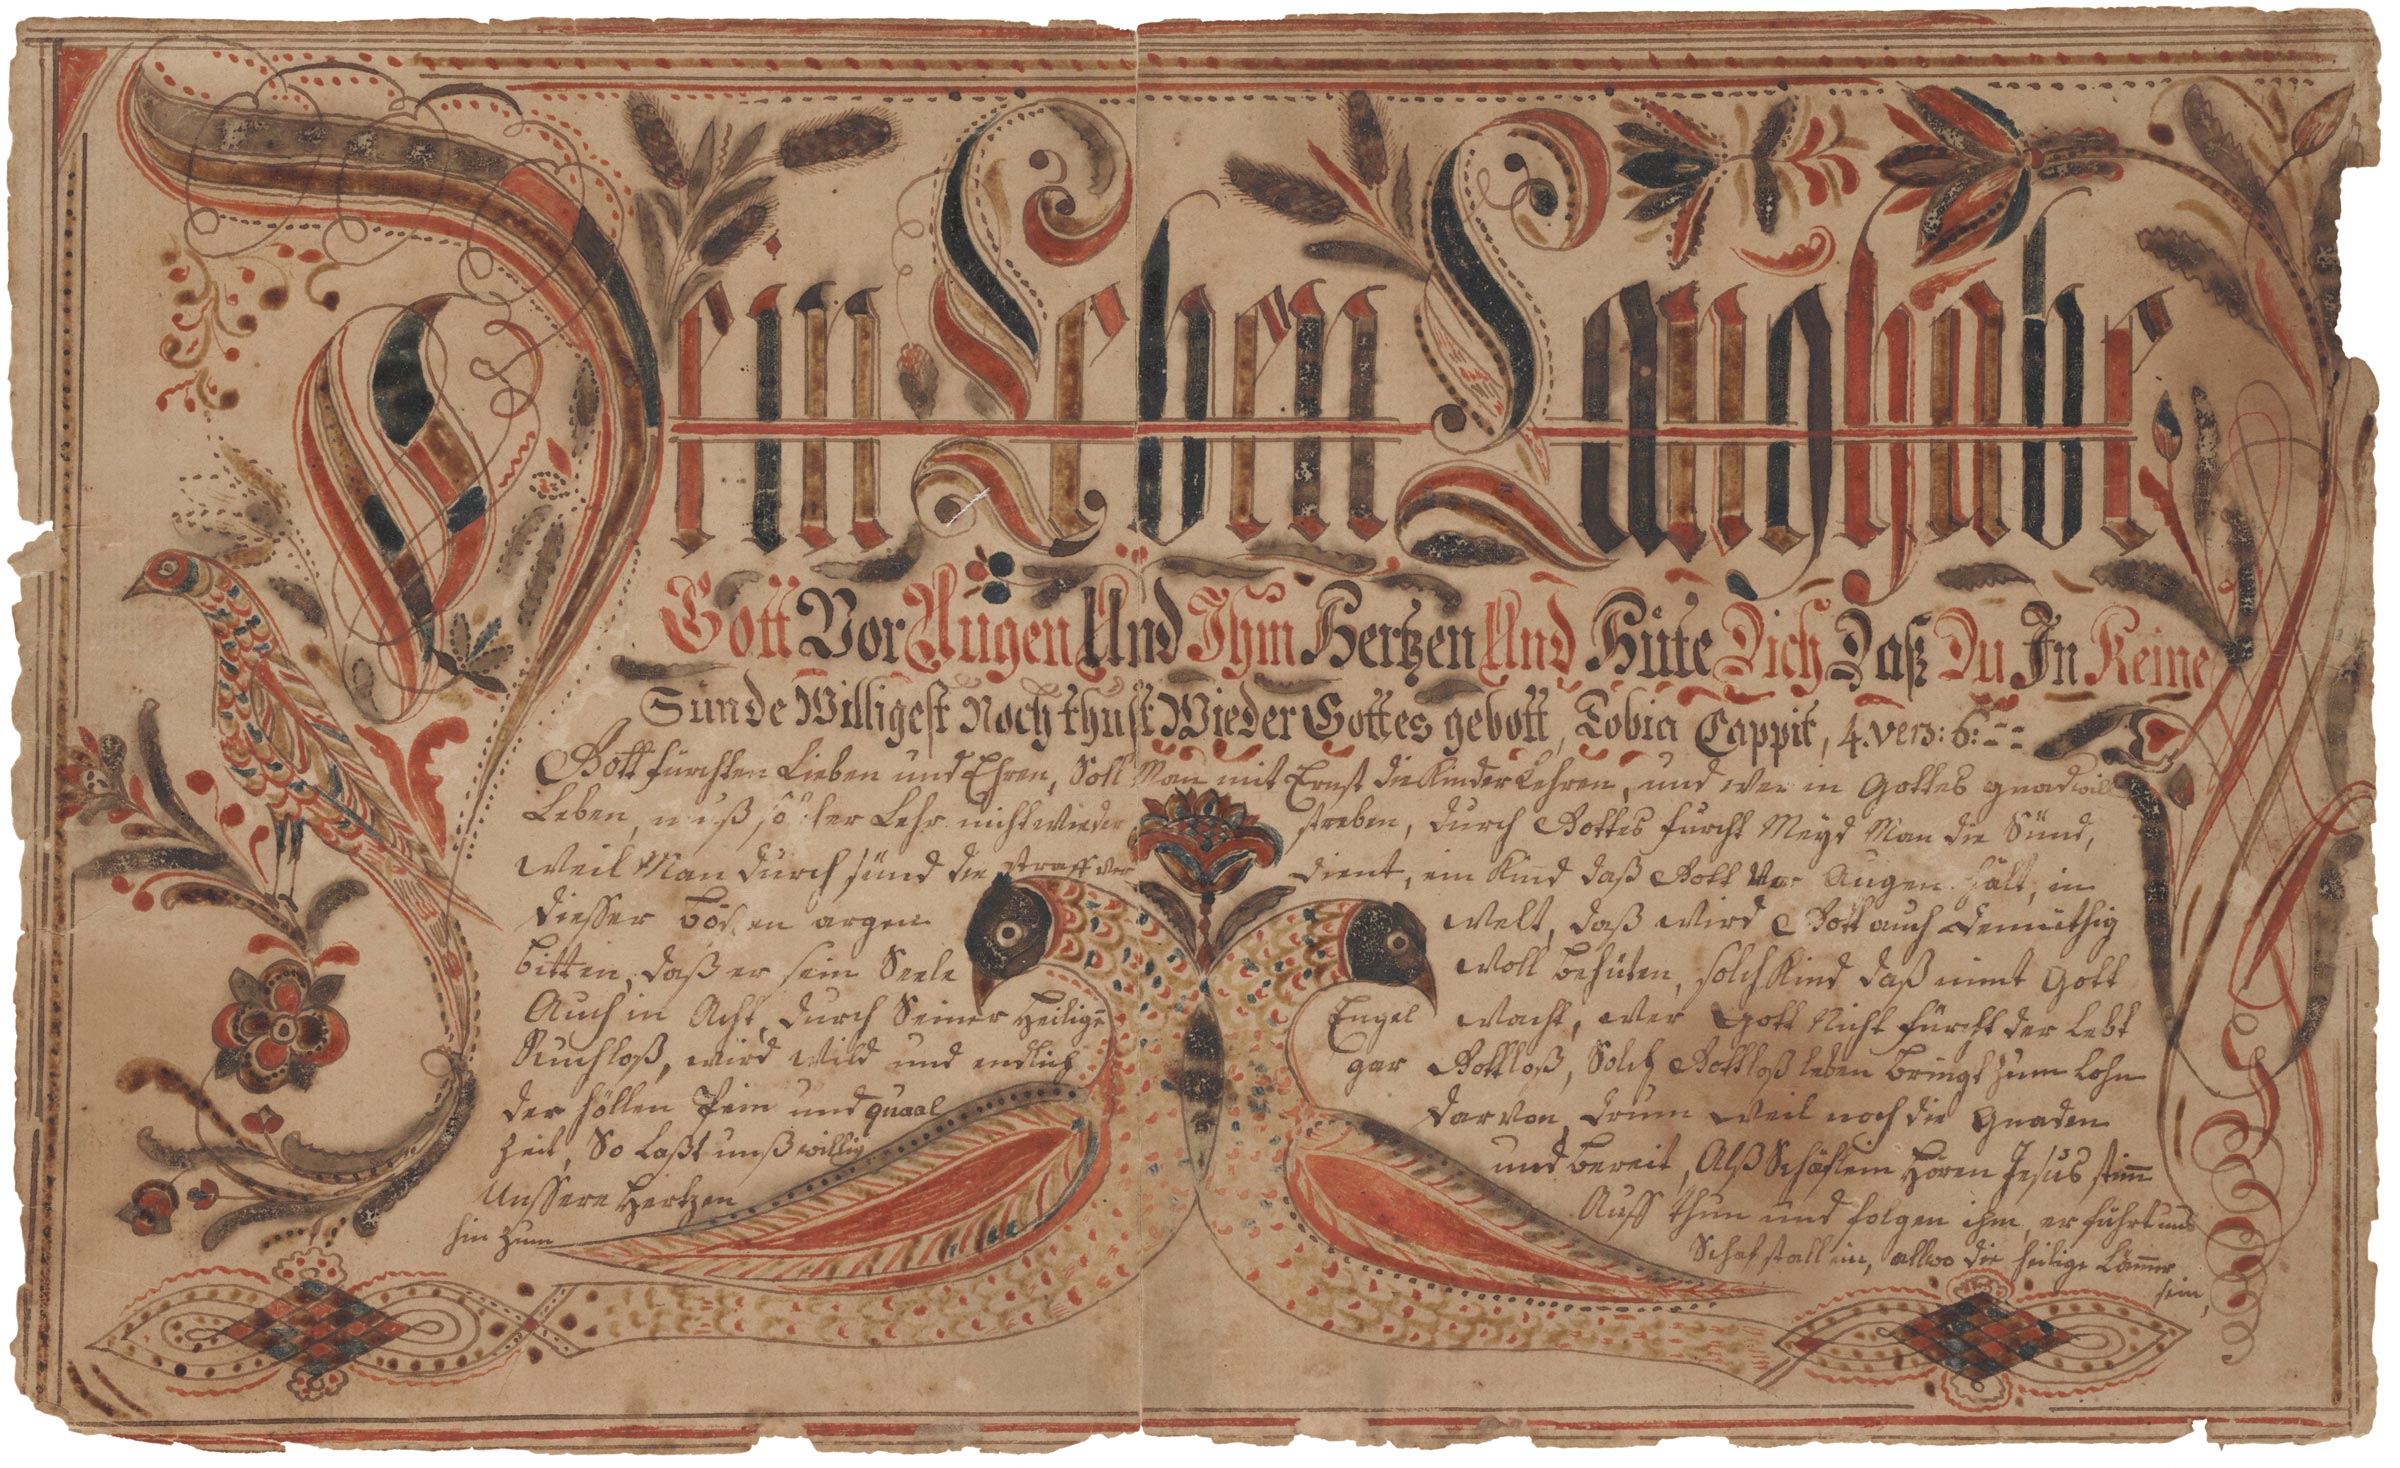 Attributed to Andreas Kolb (1749-1811), Vorschrift (writing exercise), Salford Township, Montgomery County, Pennsylvania, c. 1800